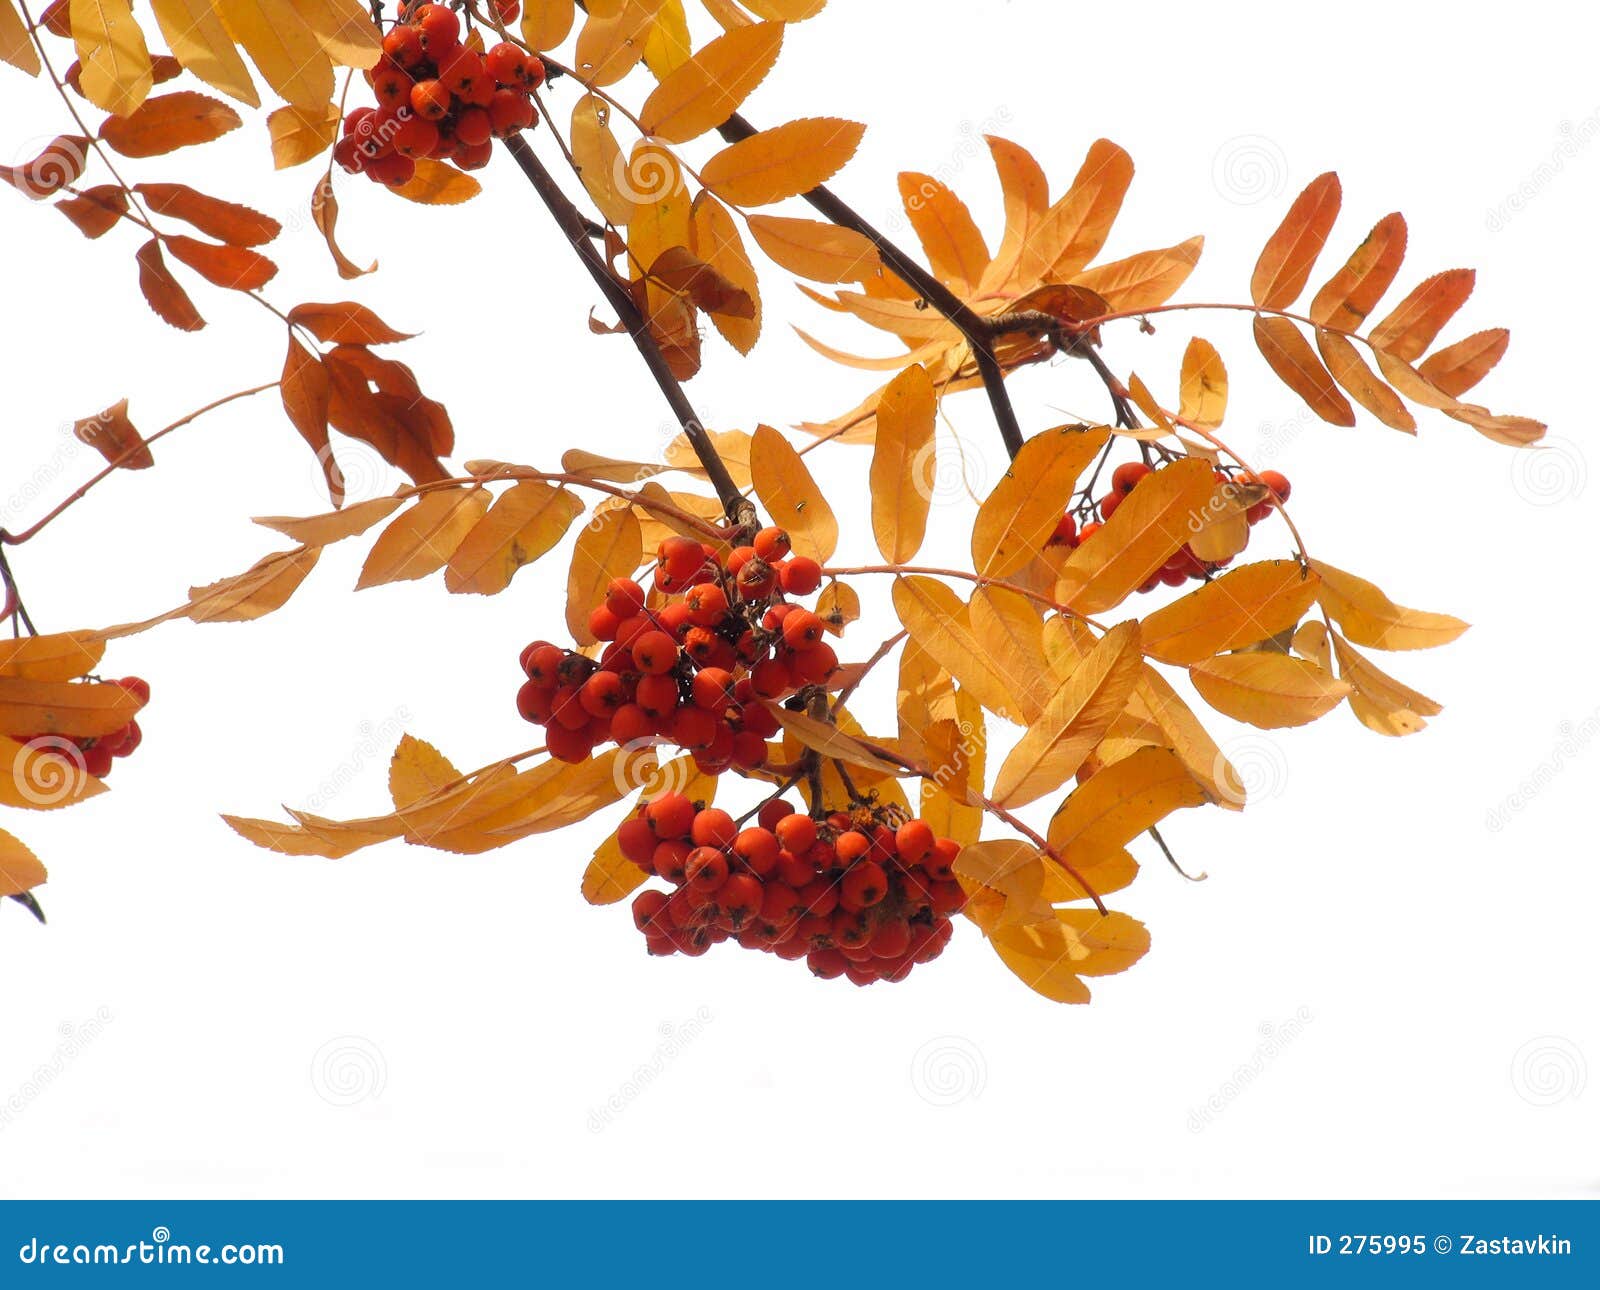 Autumn ashberry stock image. Image of bunchy, ashberry - 275995